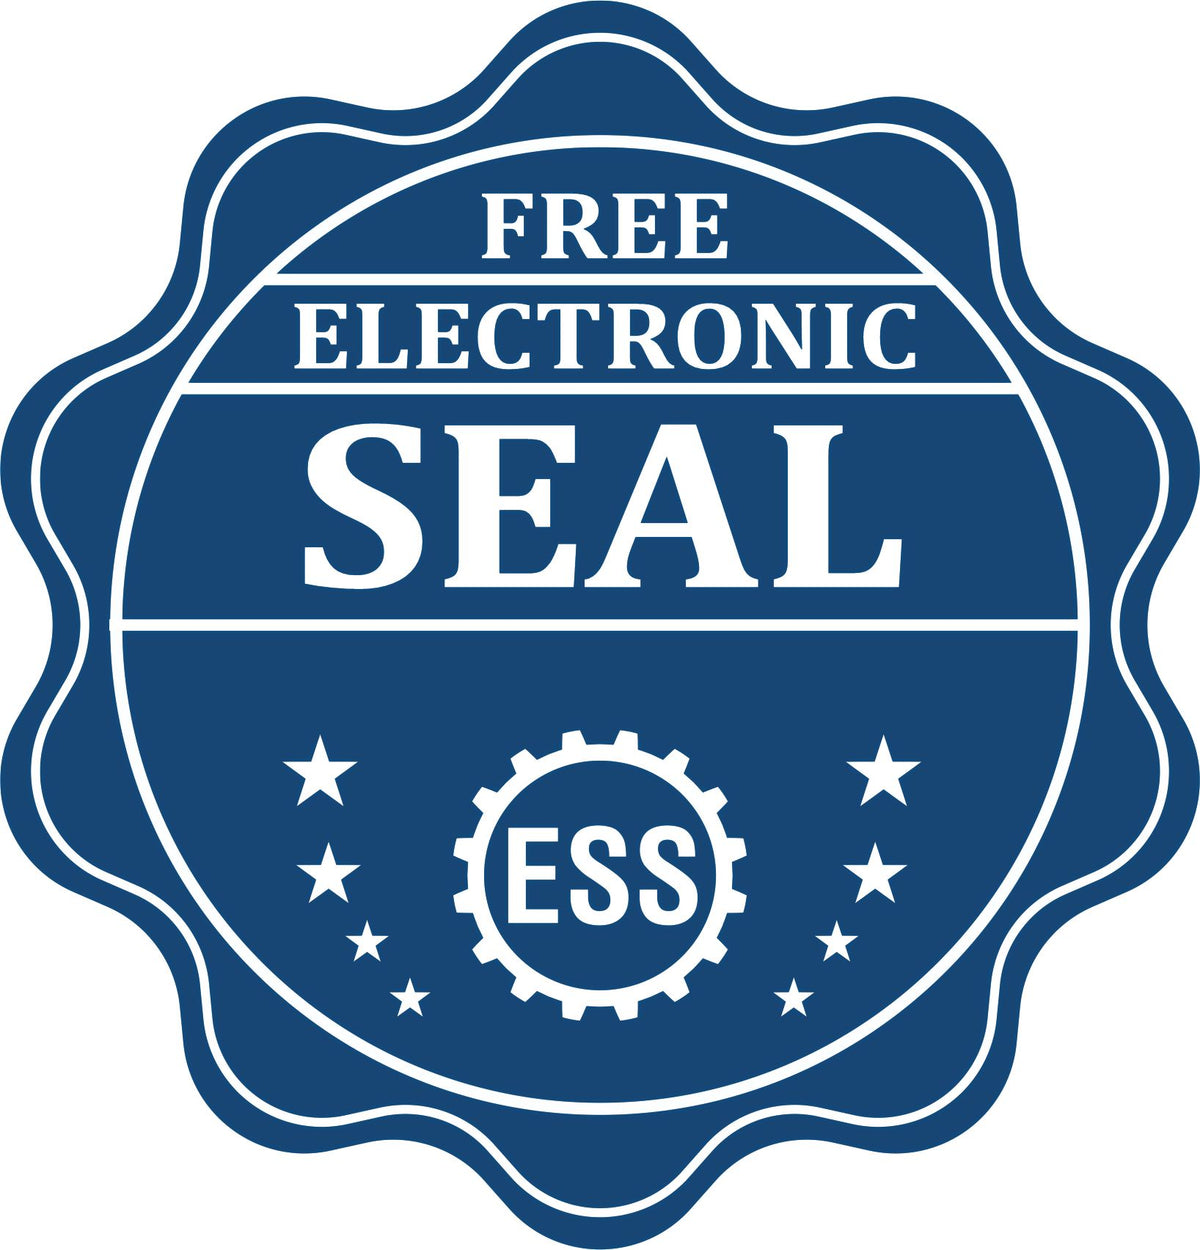 A badge showing a free electronic seal for the Premium MaxLight Pre-Inked Georgia Landscape Architectural Stamp with stars and the ESS gear on the emblem.